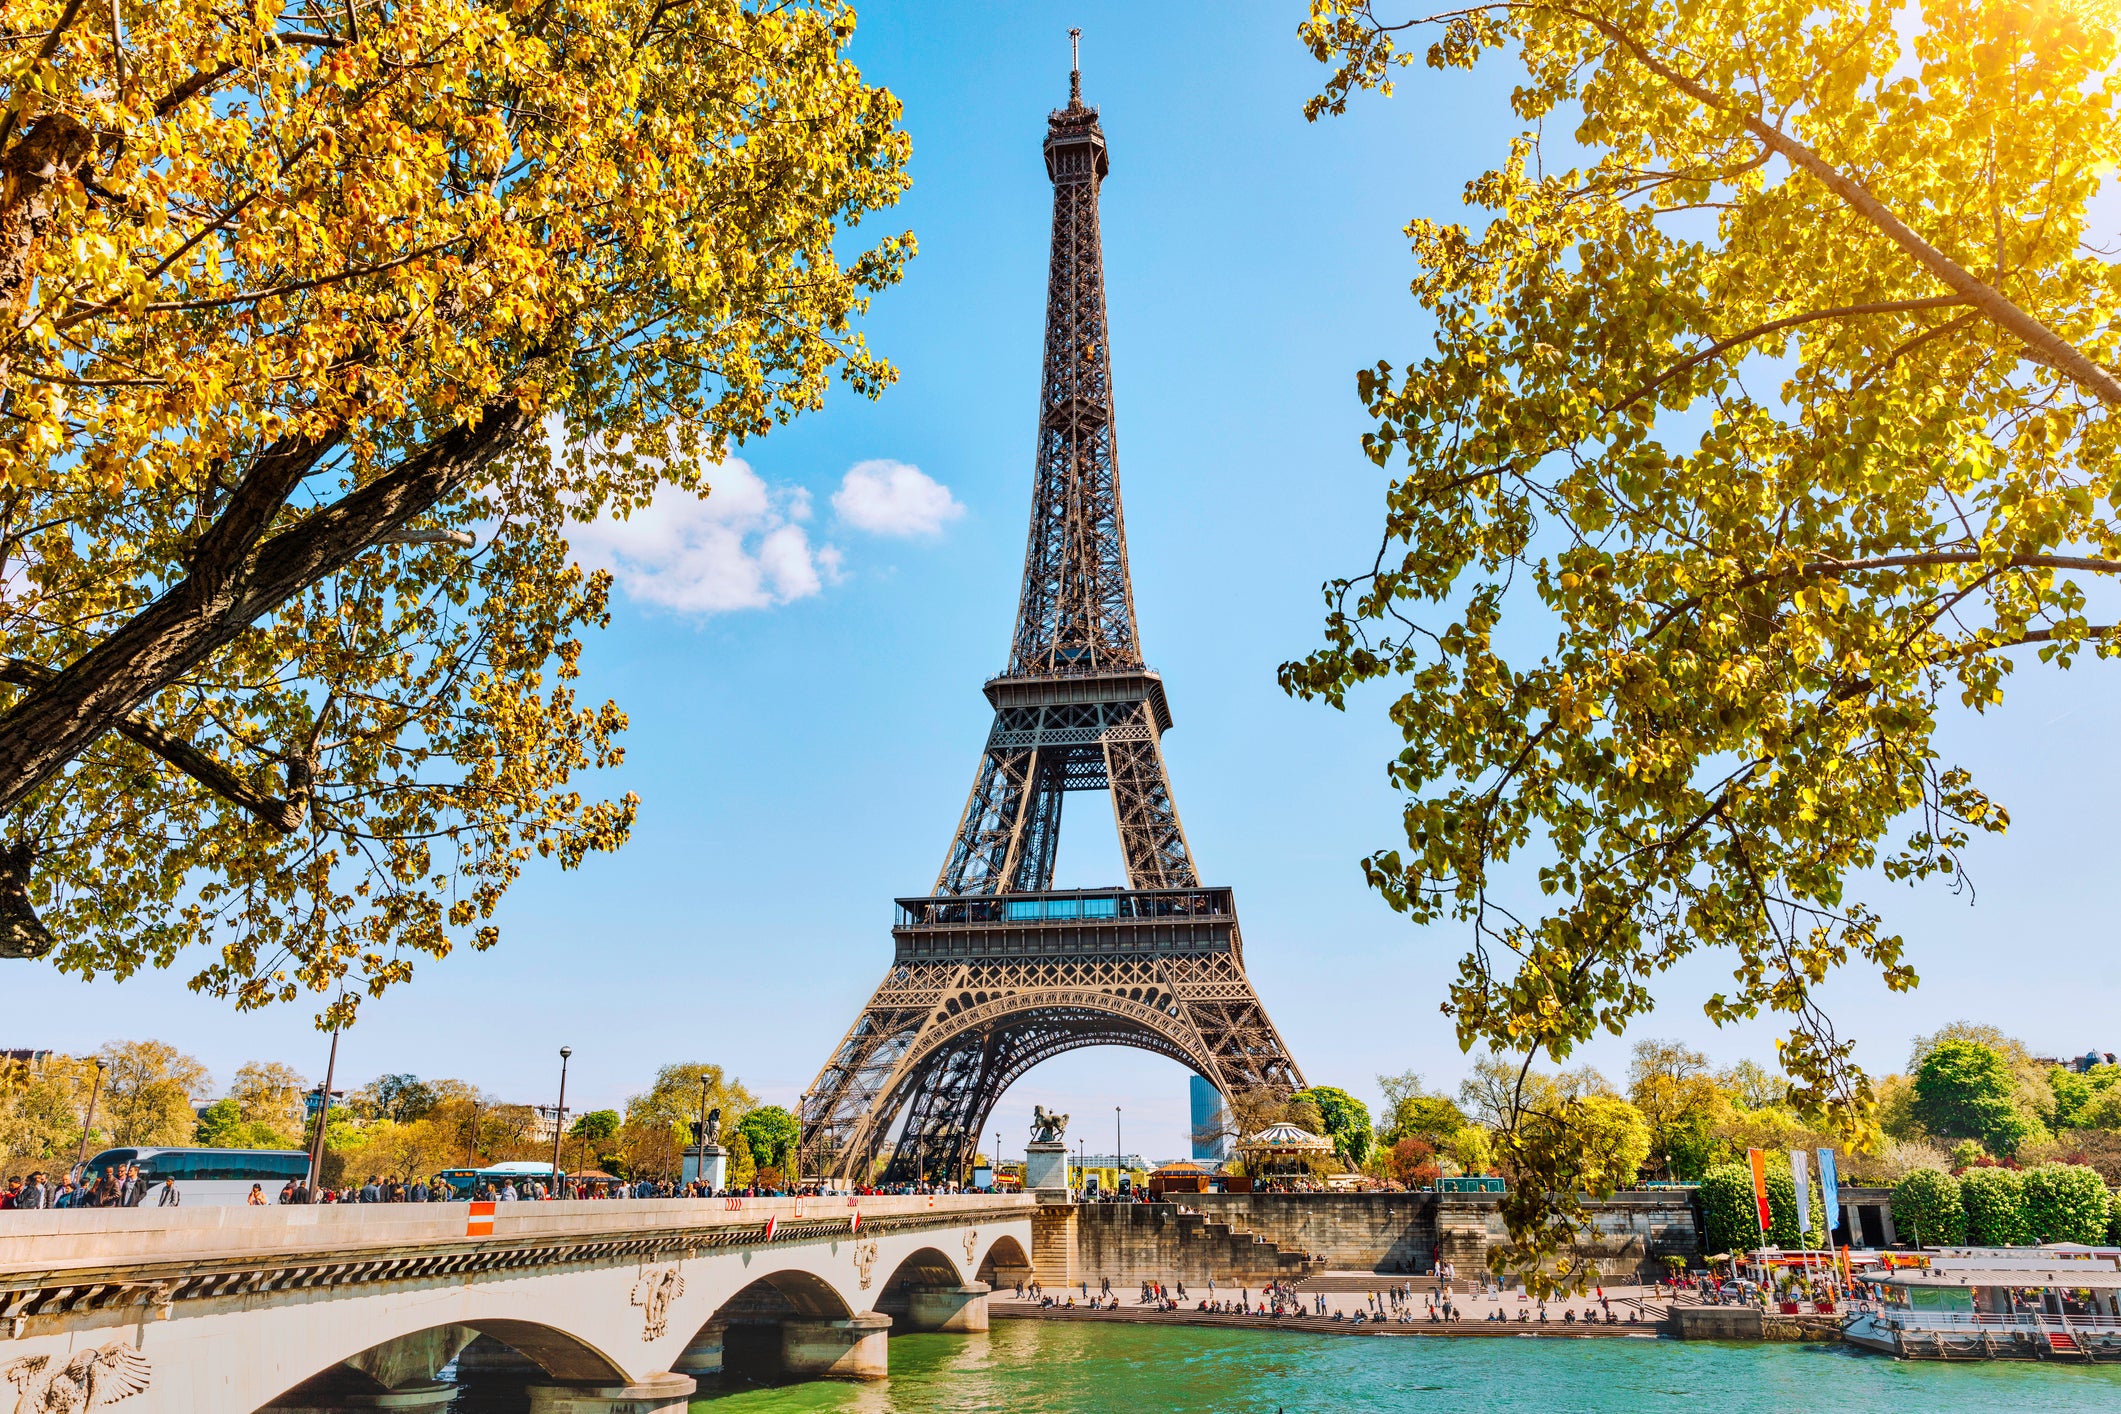 The Eiffel Tower in Paris, France (istock)